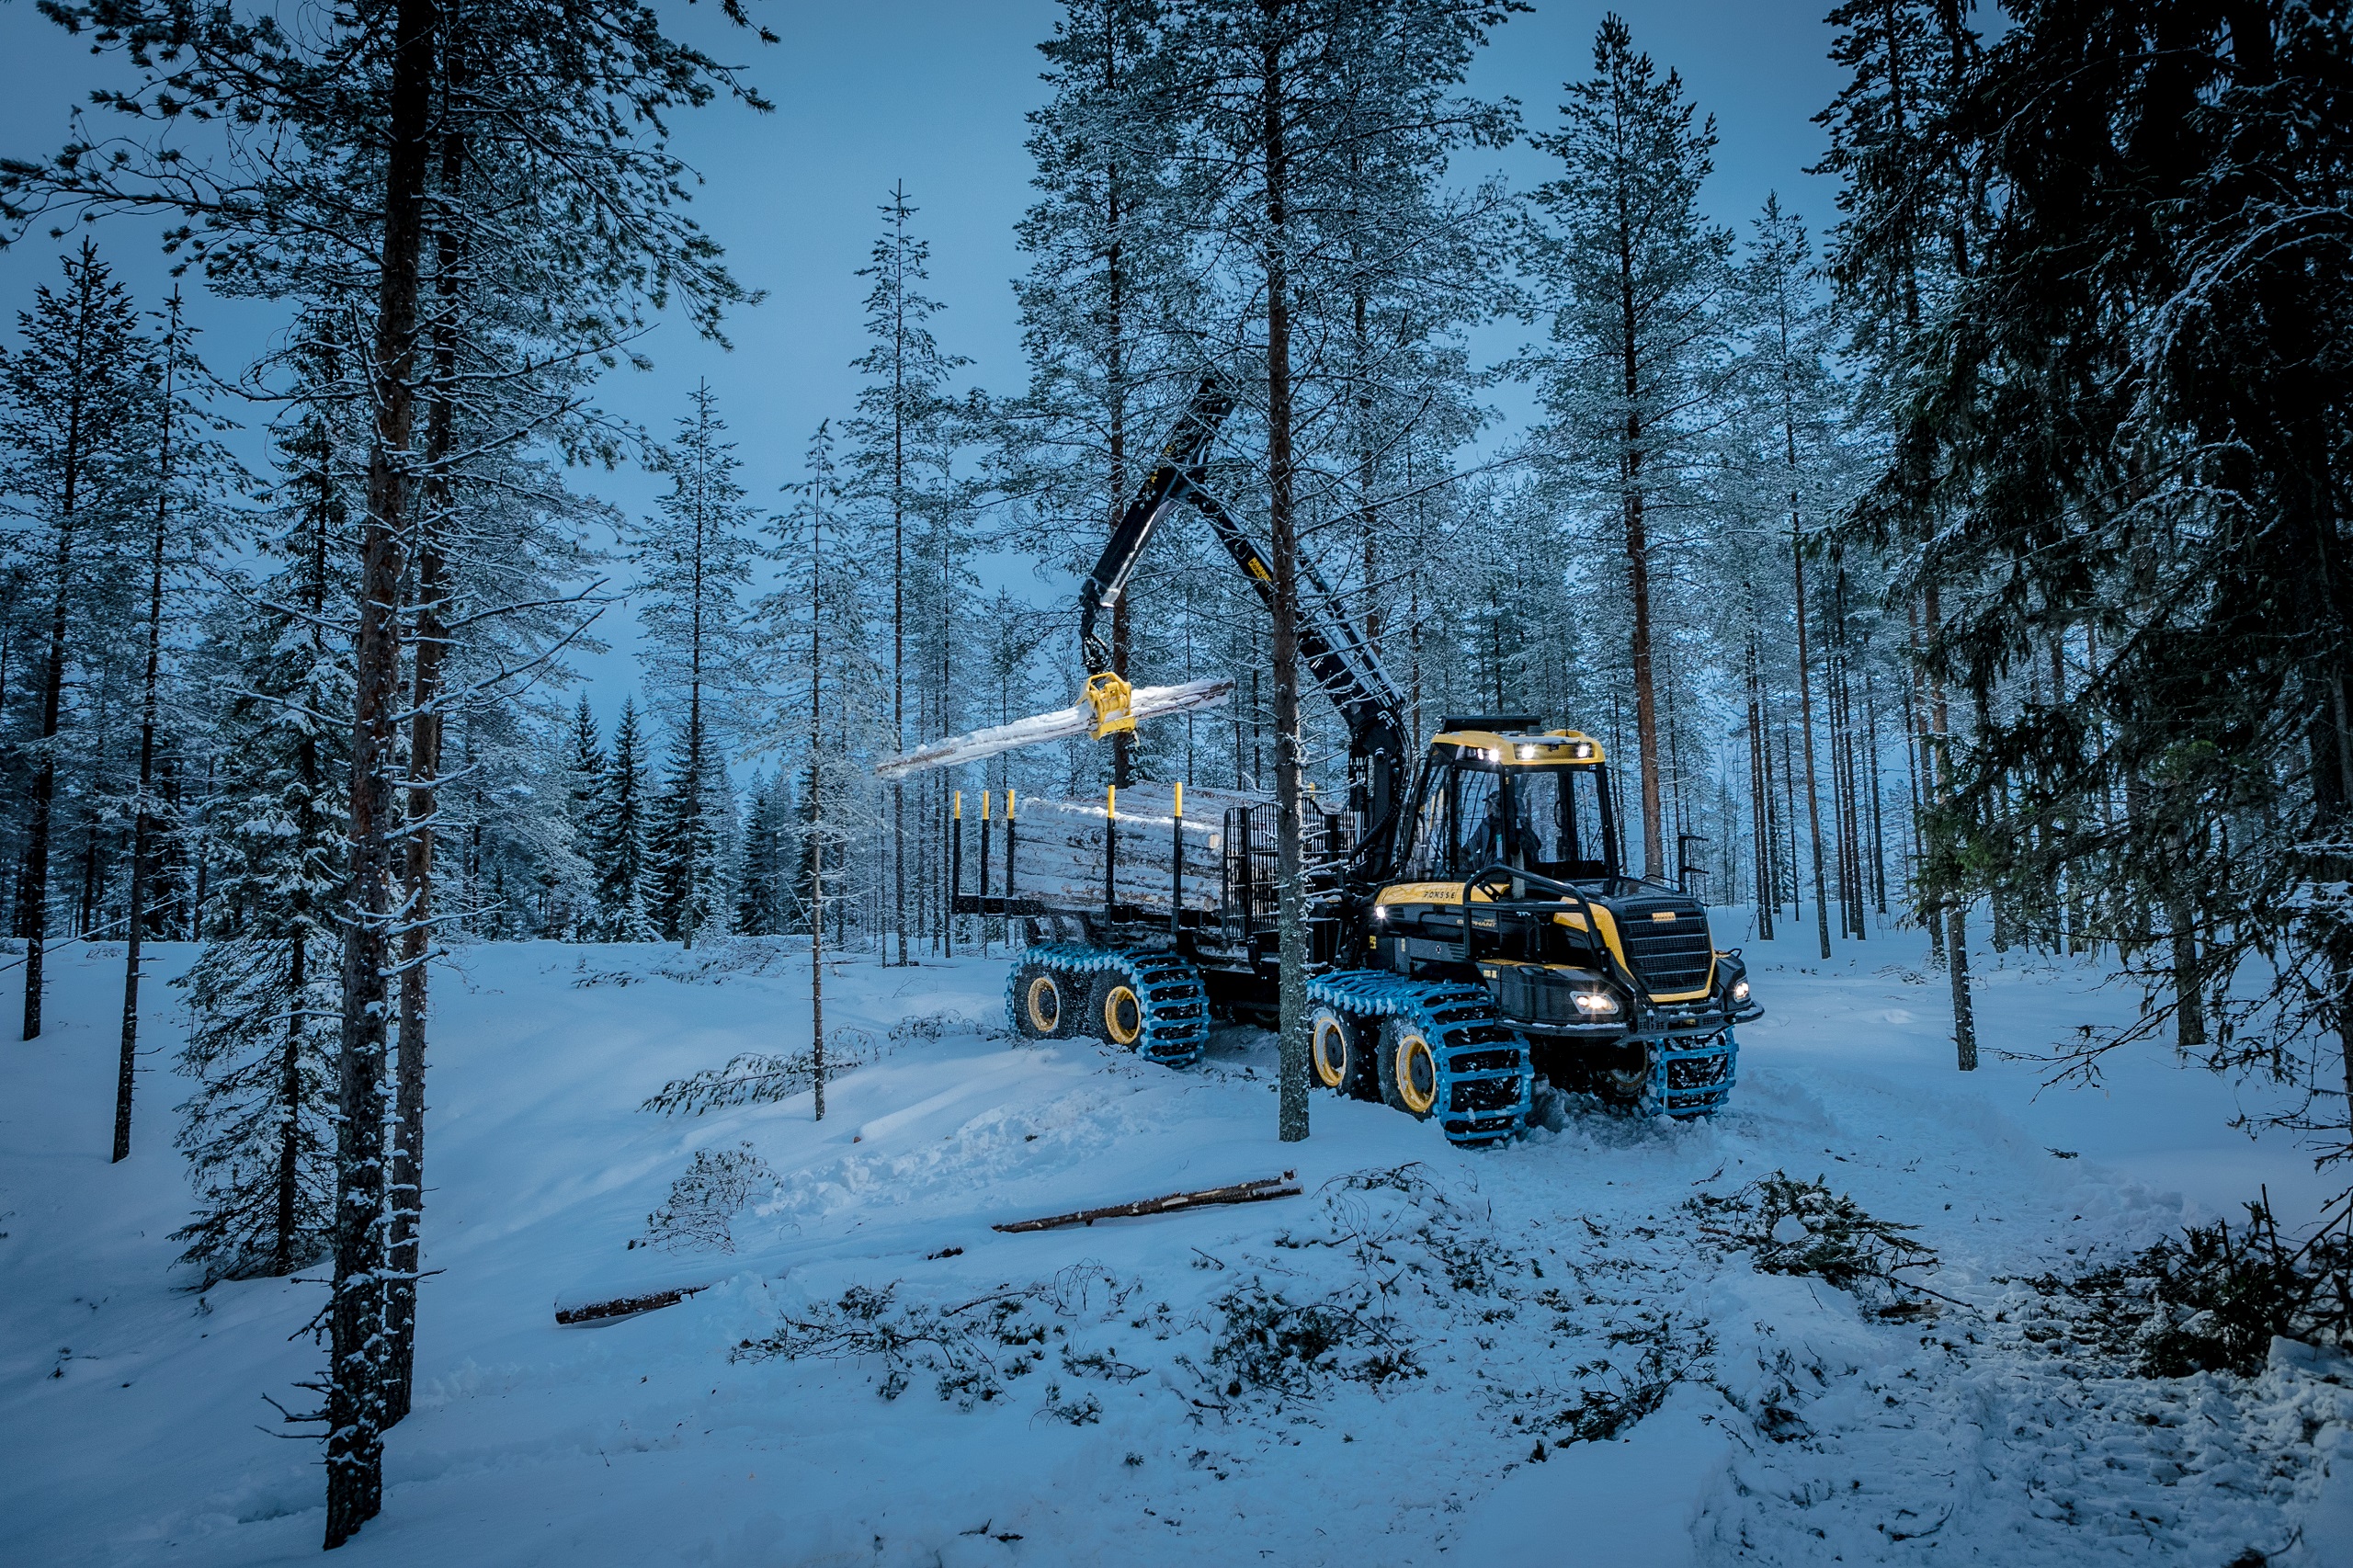 The picture depicts a snowy forest at night, with a yellow tractor in the centre loading cut trees onto its trailer.